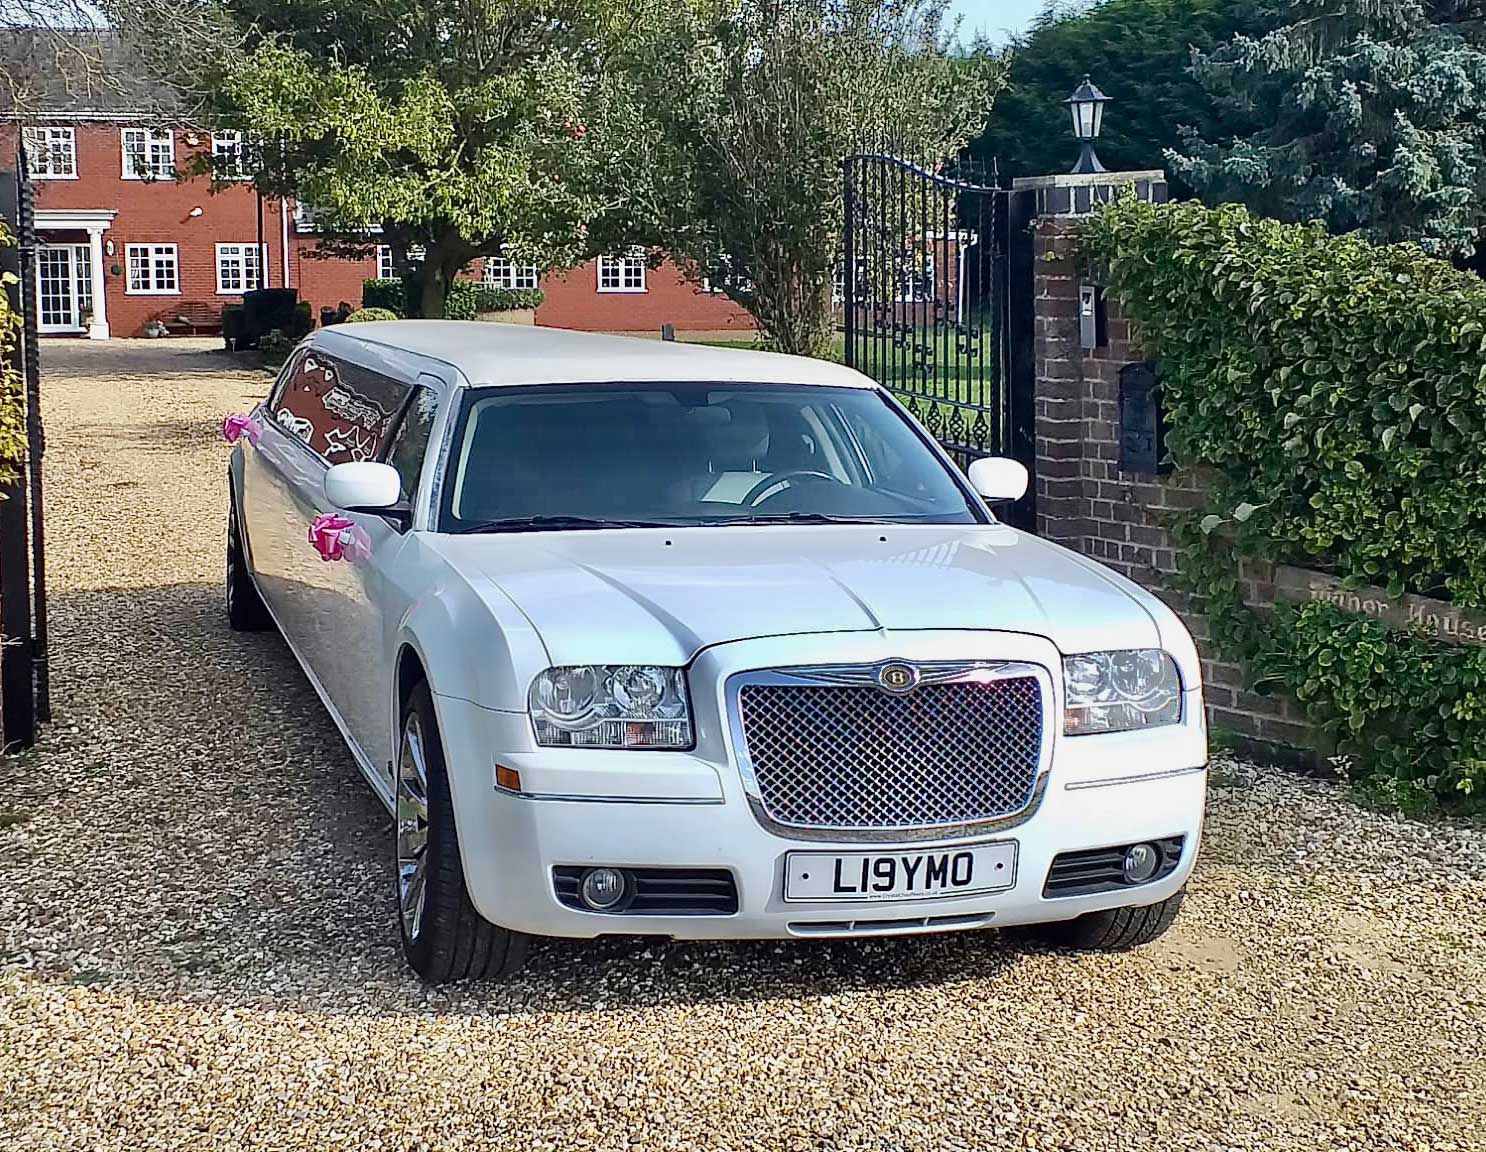 Wedding Limo Hire In Bedfordshire